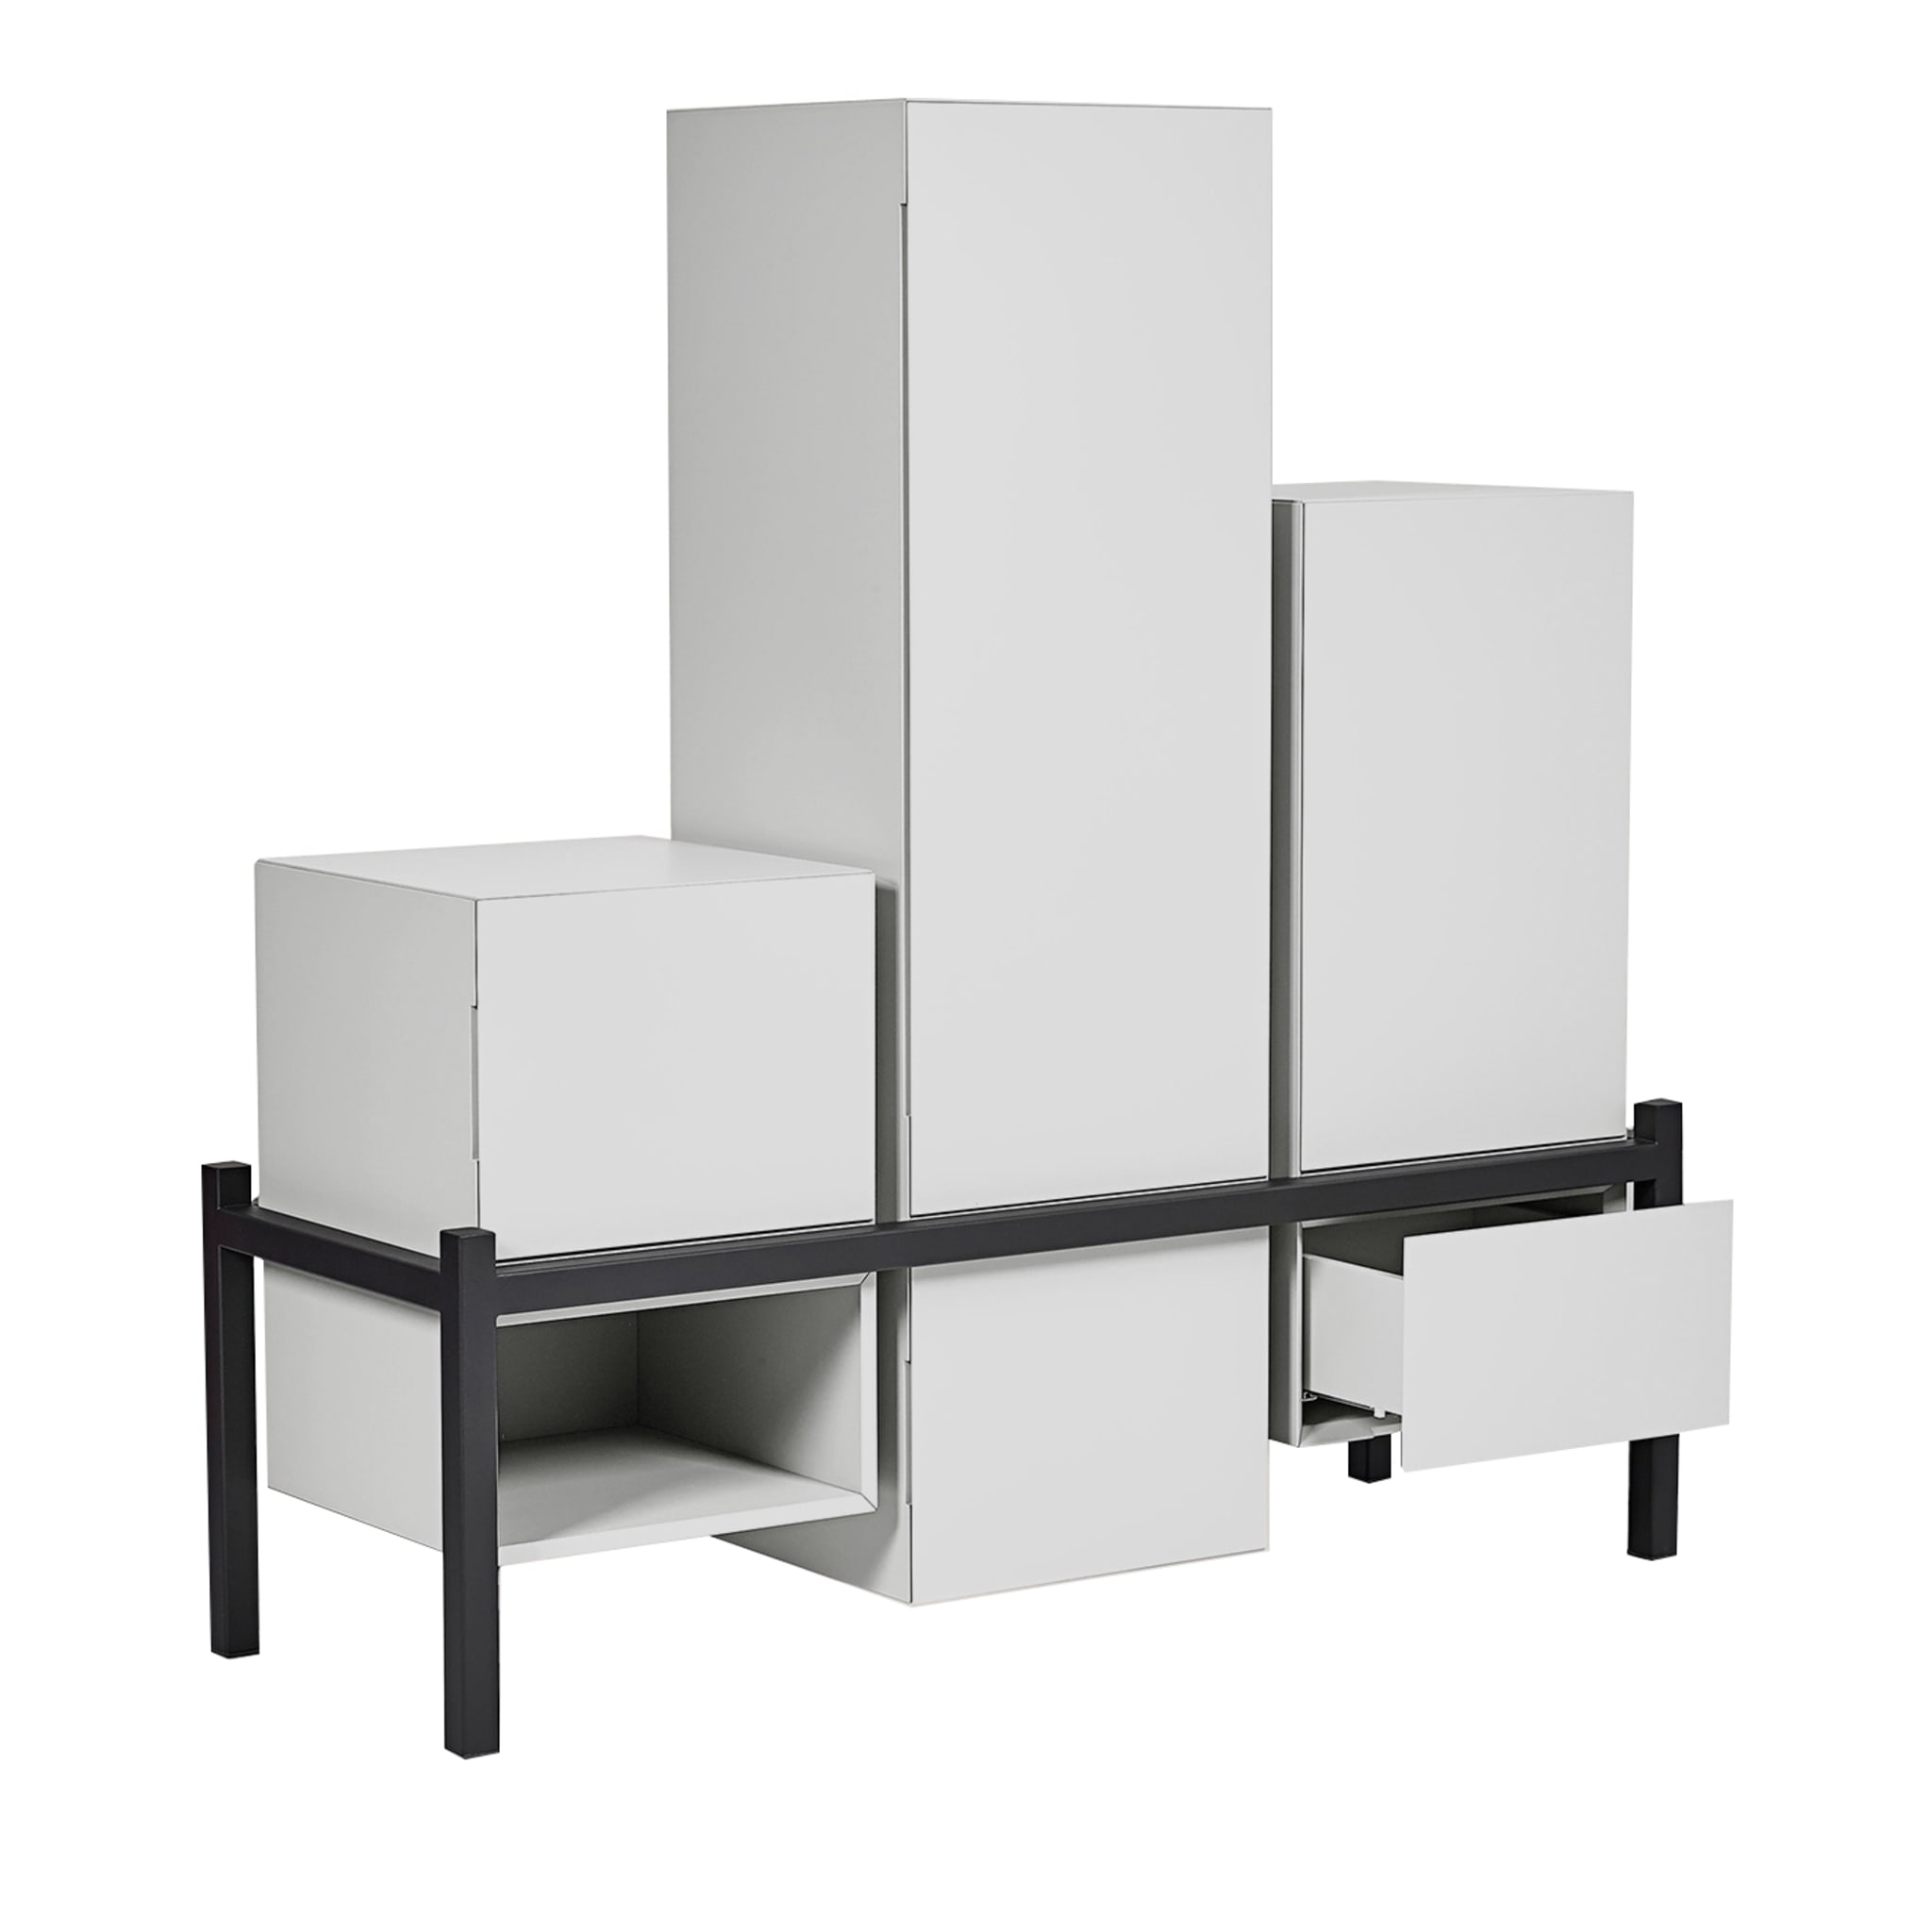 Palafitta Black and White Cabinet by Studio14 - Main view